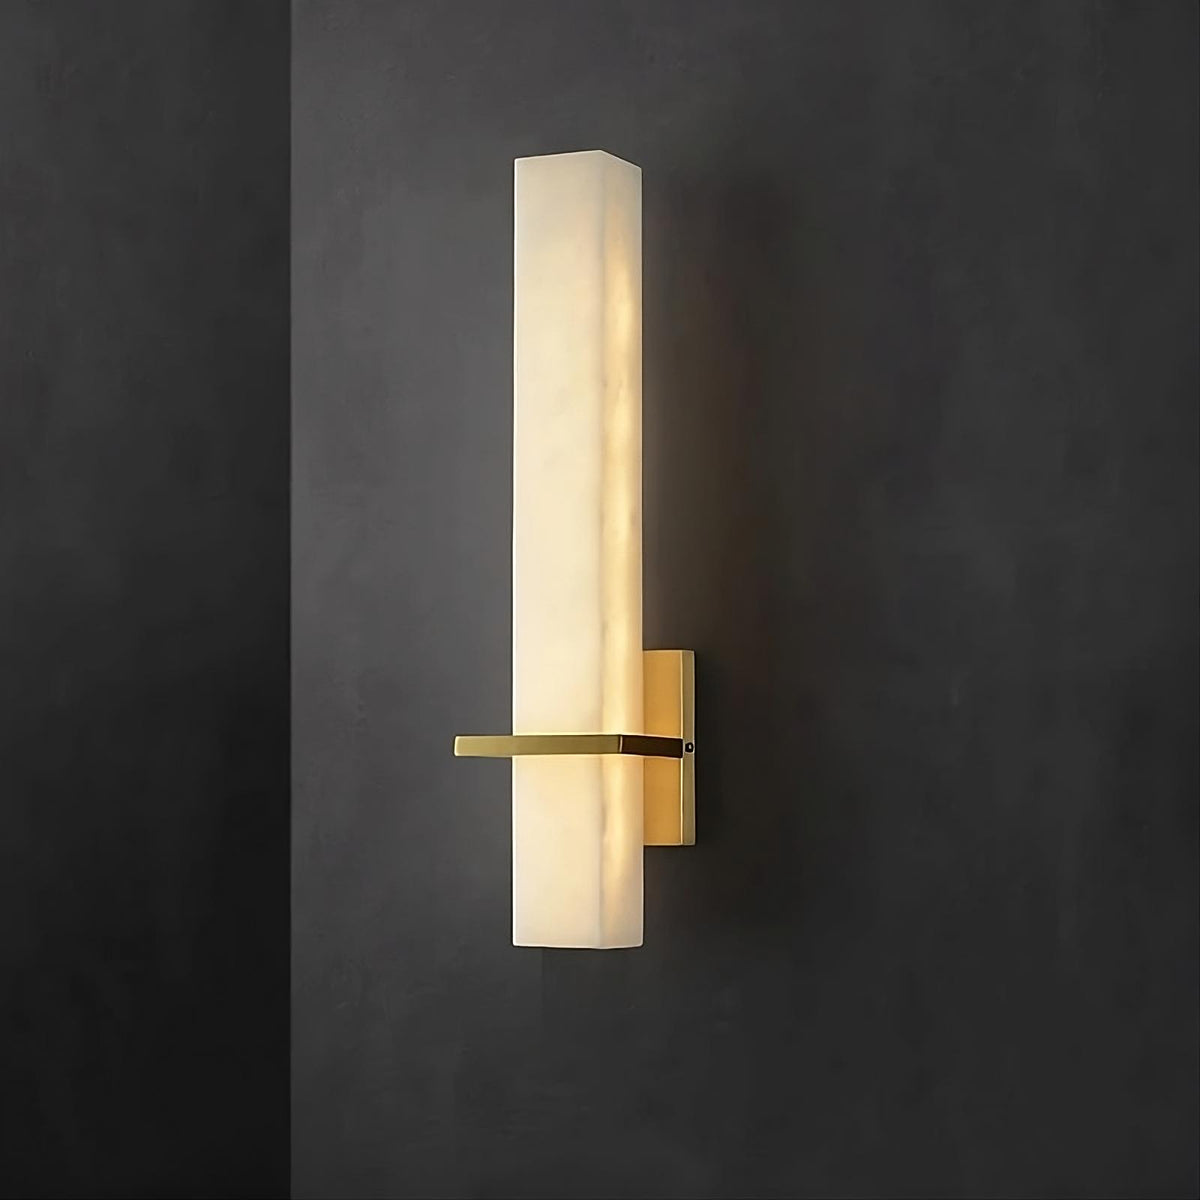 A modern Natural Marble Indoor Sconce with a sleek, vertical rectangular design emits a soft, ambient light. Featuring a frosted glass shade and matte gold metal base, this Morsale.com LED light fixture is mounted on a dark charcoal gray wall. The minimalist design adds an elegant touch to the setting.